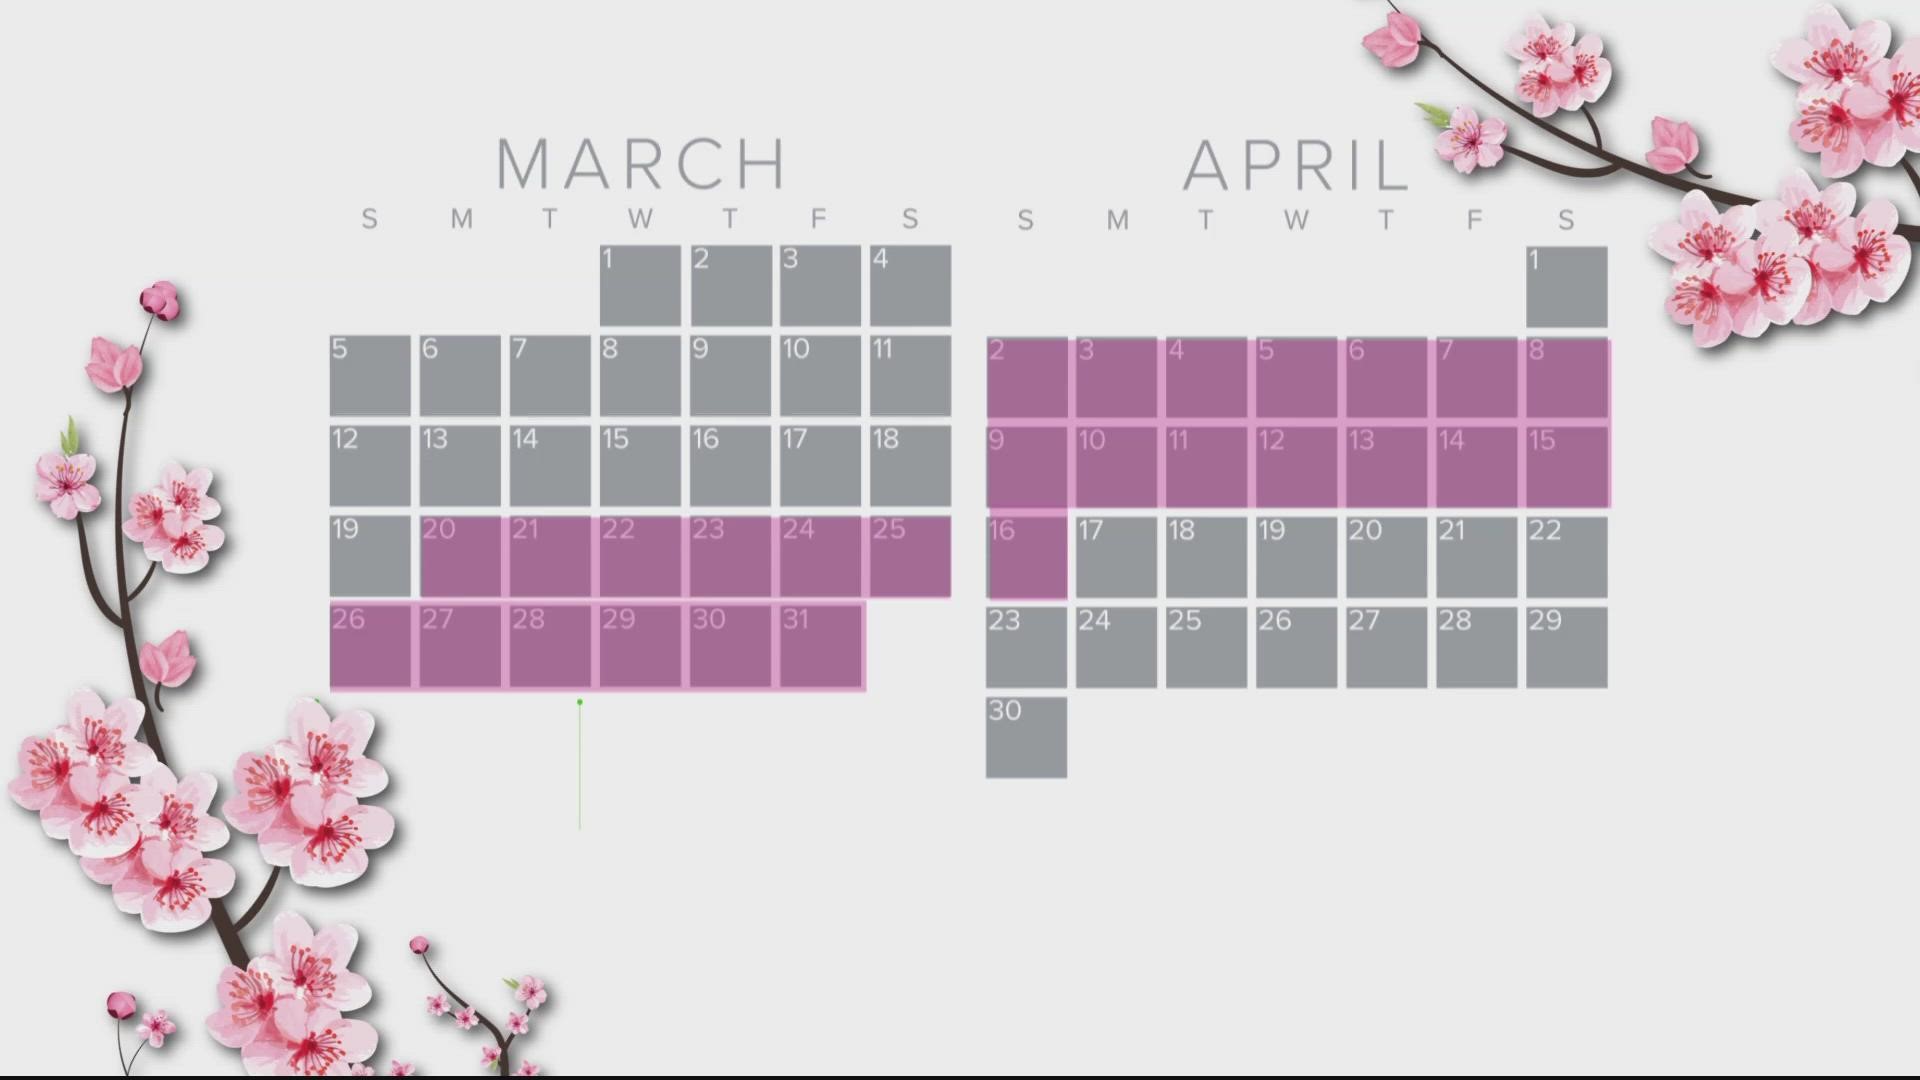 Set your alarm! National Cherry Blossom and Mayor Bowser to announce 2023 festival plans and reveal peak bloom prediction.